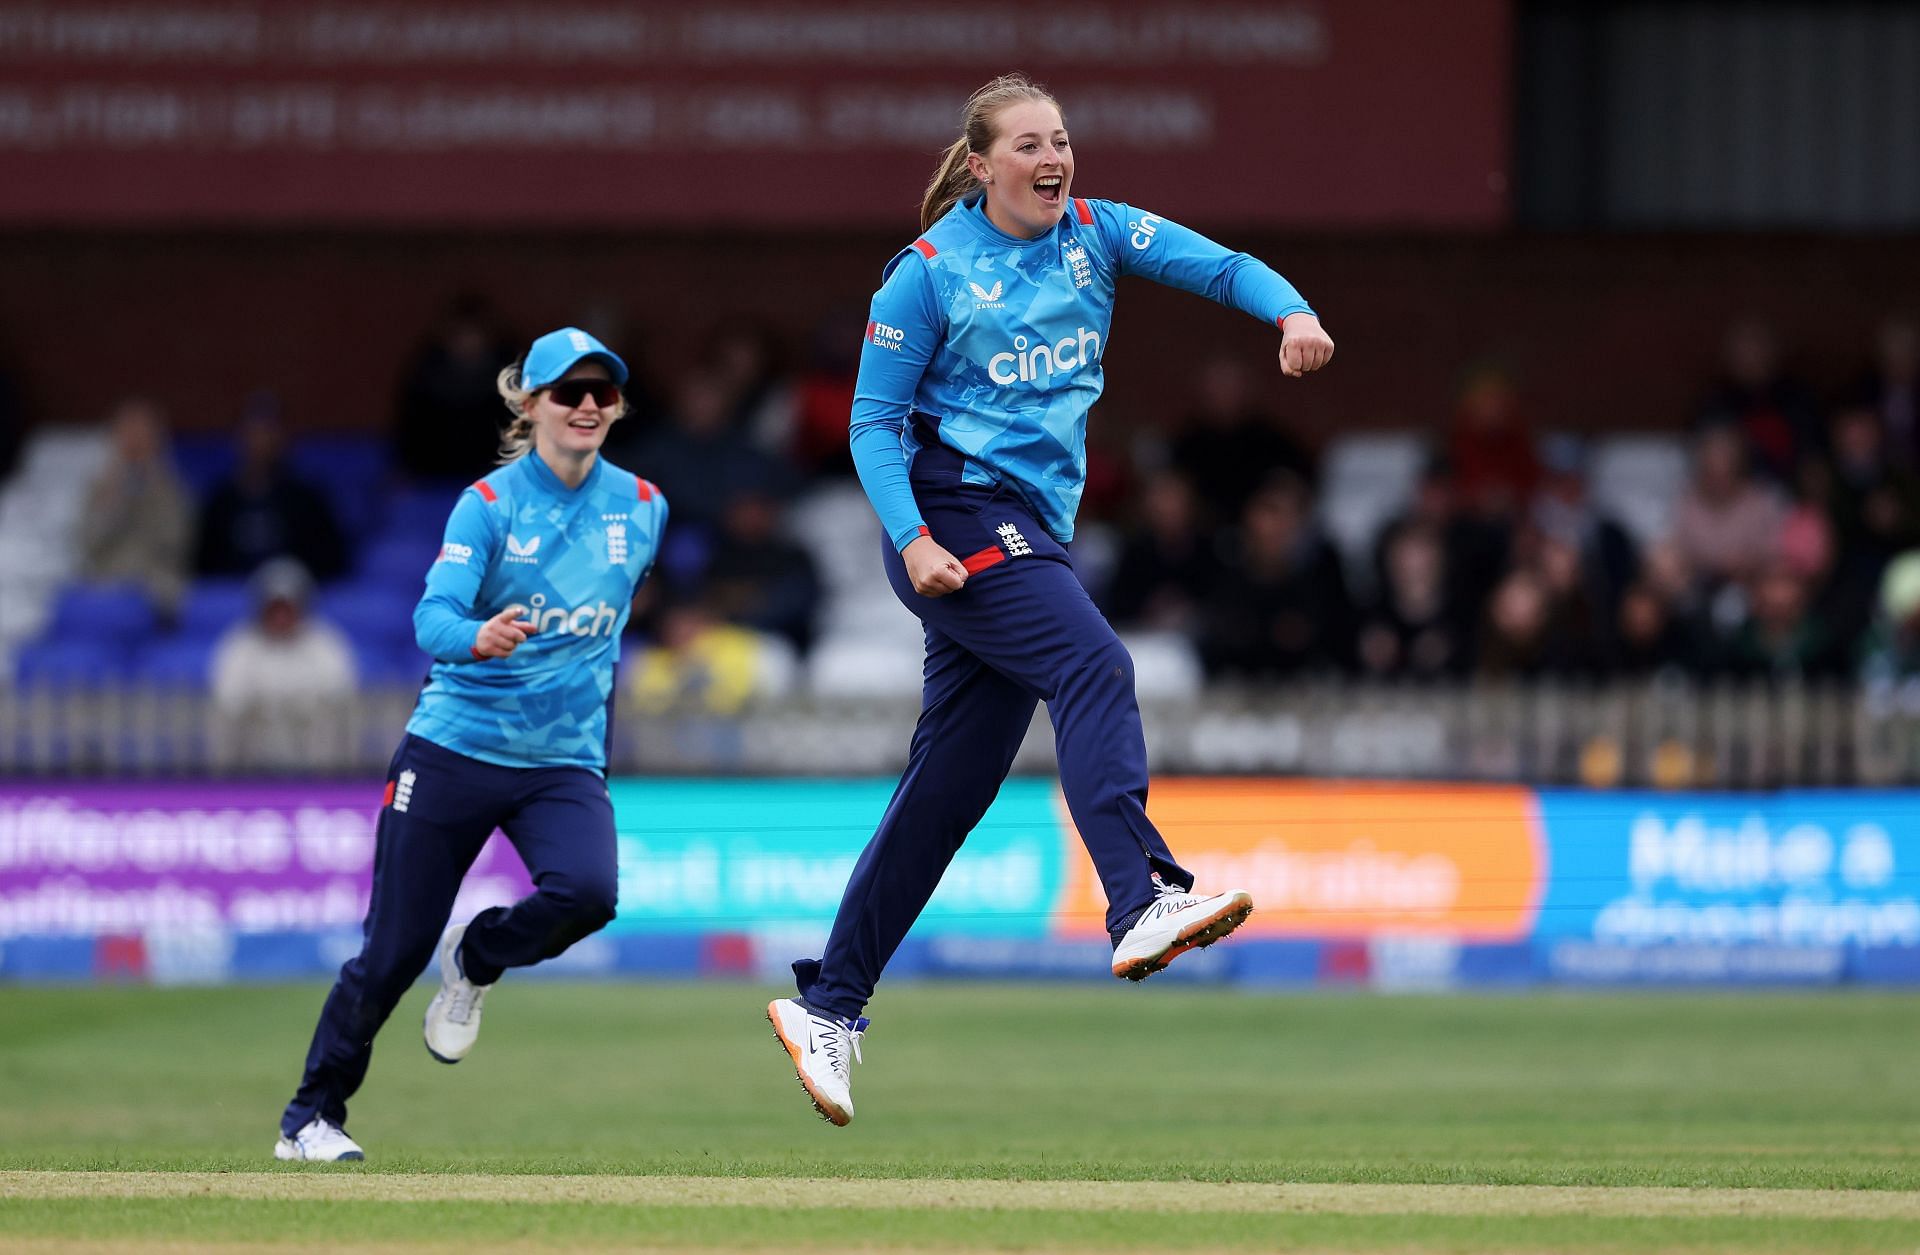 England Women vs Pakistan Women, 2nd ODI: Probable XIs, Match Prediction, Pitch Report, Weather Forecast, and Live Streaming Details